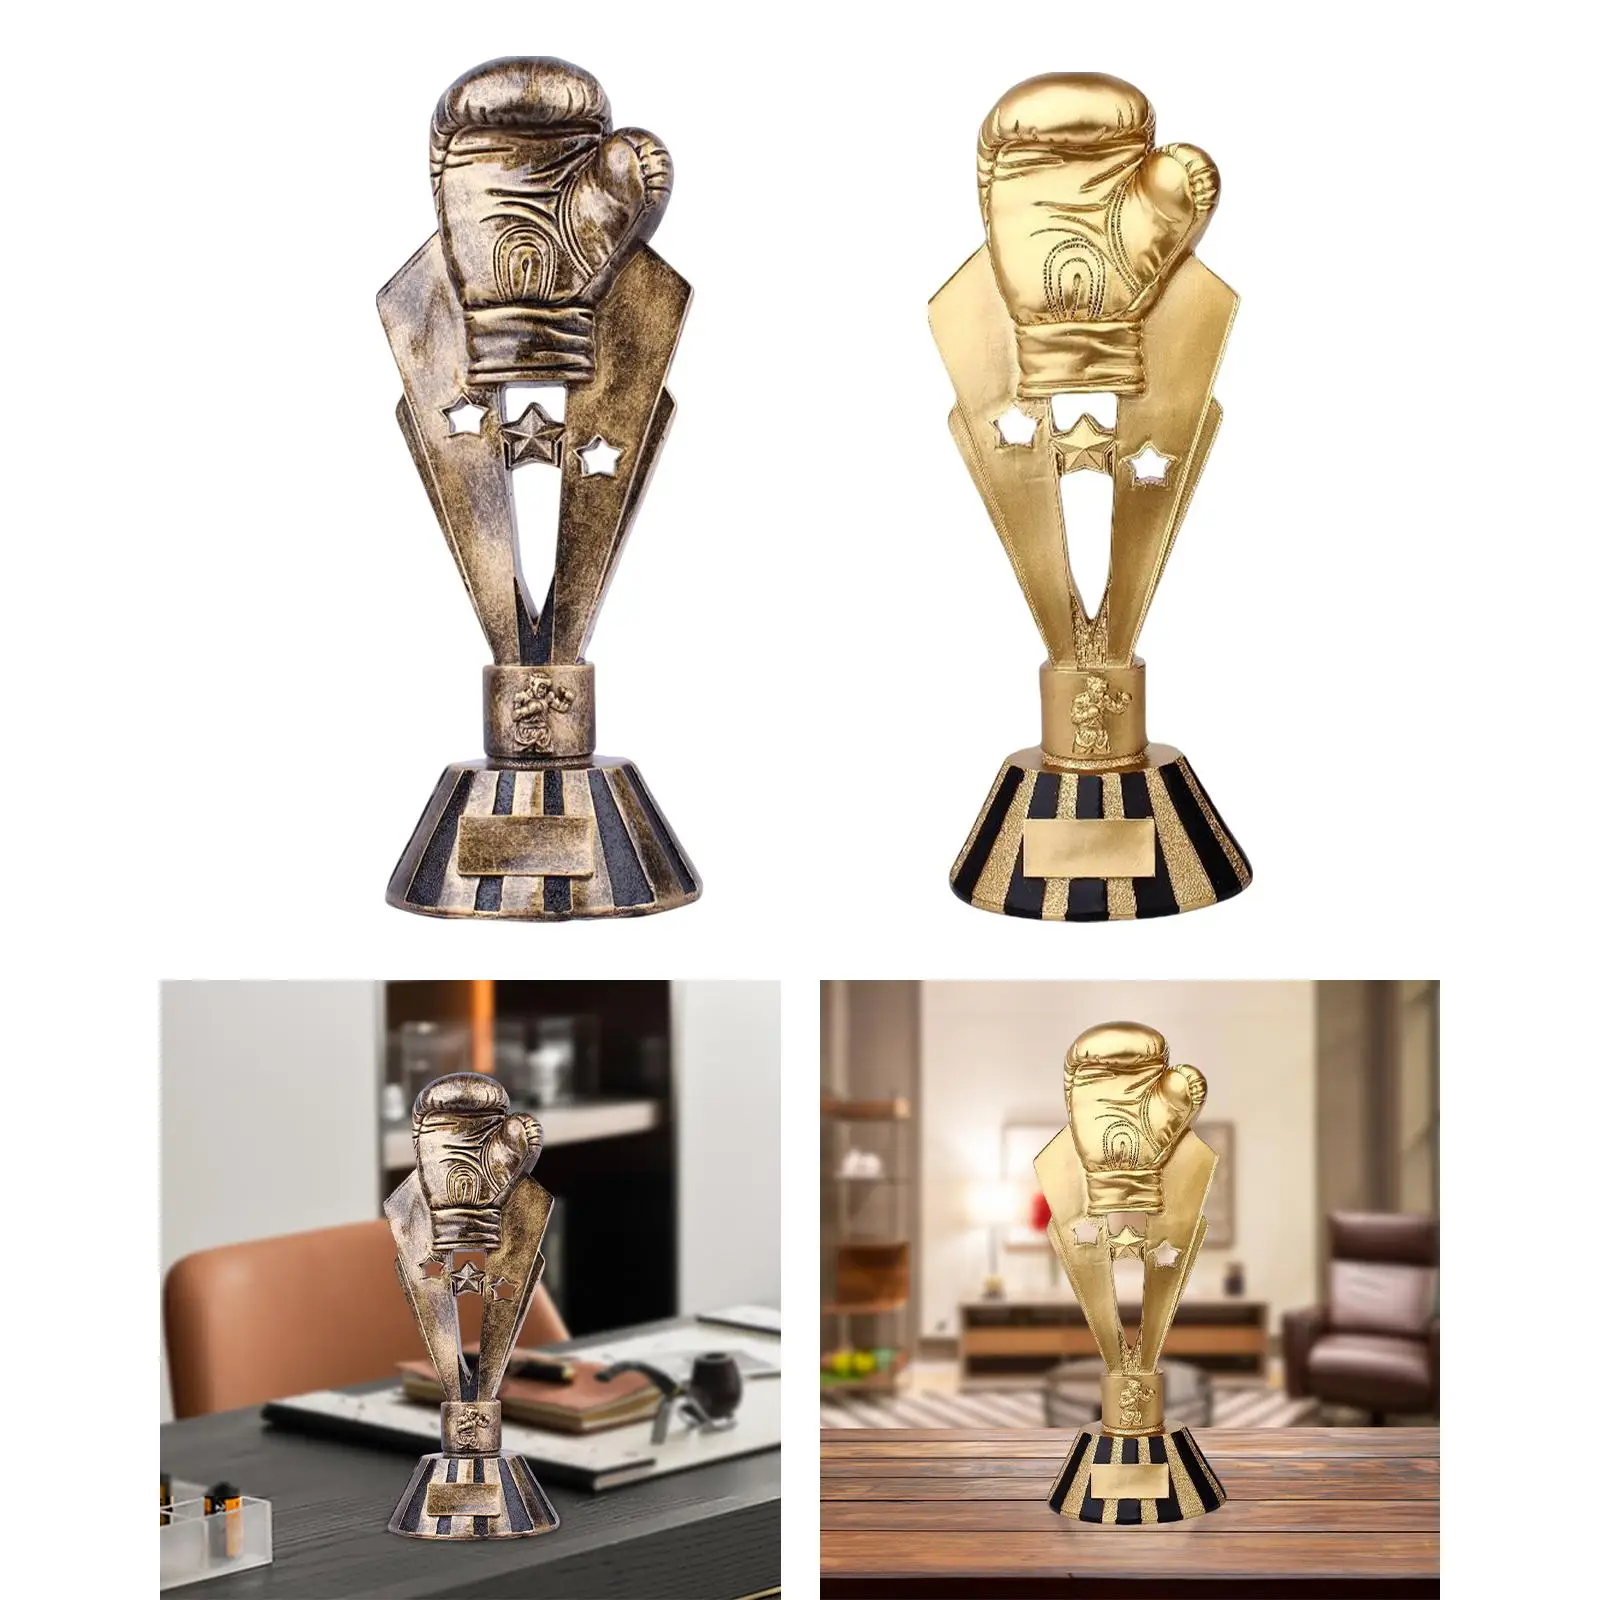 Boxing Trophies Resin Statue Figurine Boxing Award Ornaments for Competition